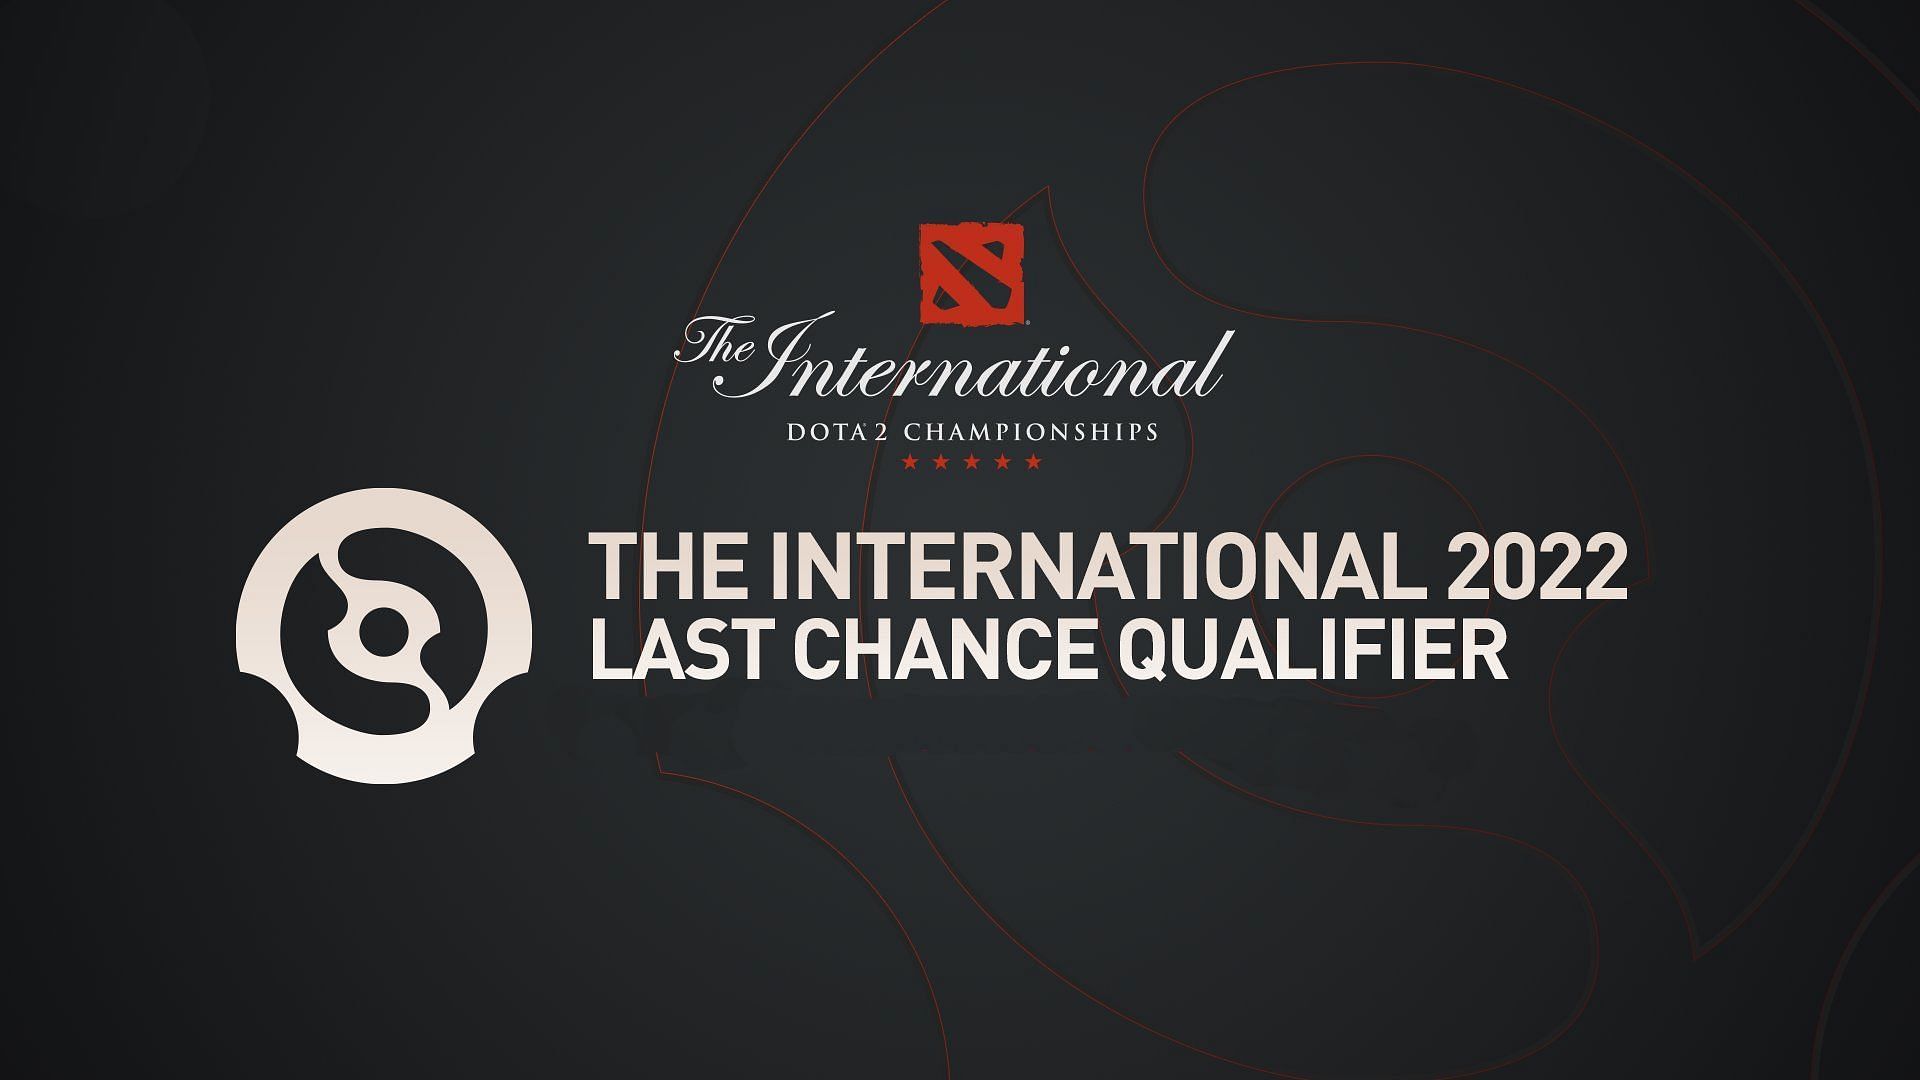 DOTA 2 The International 11 Last Chance Qualifier: Schedule, participating teams, where to watch